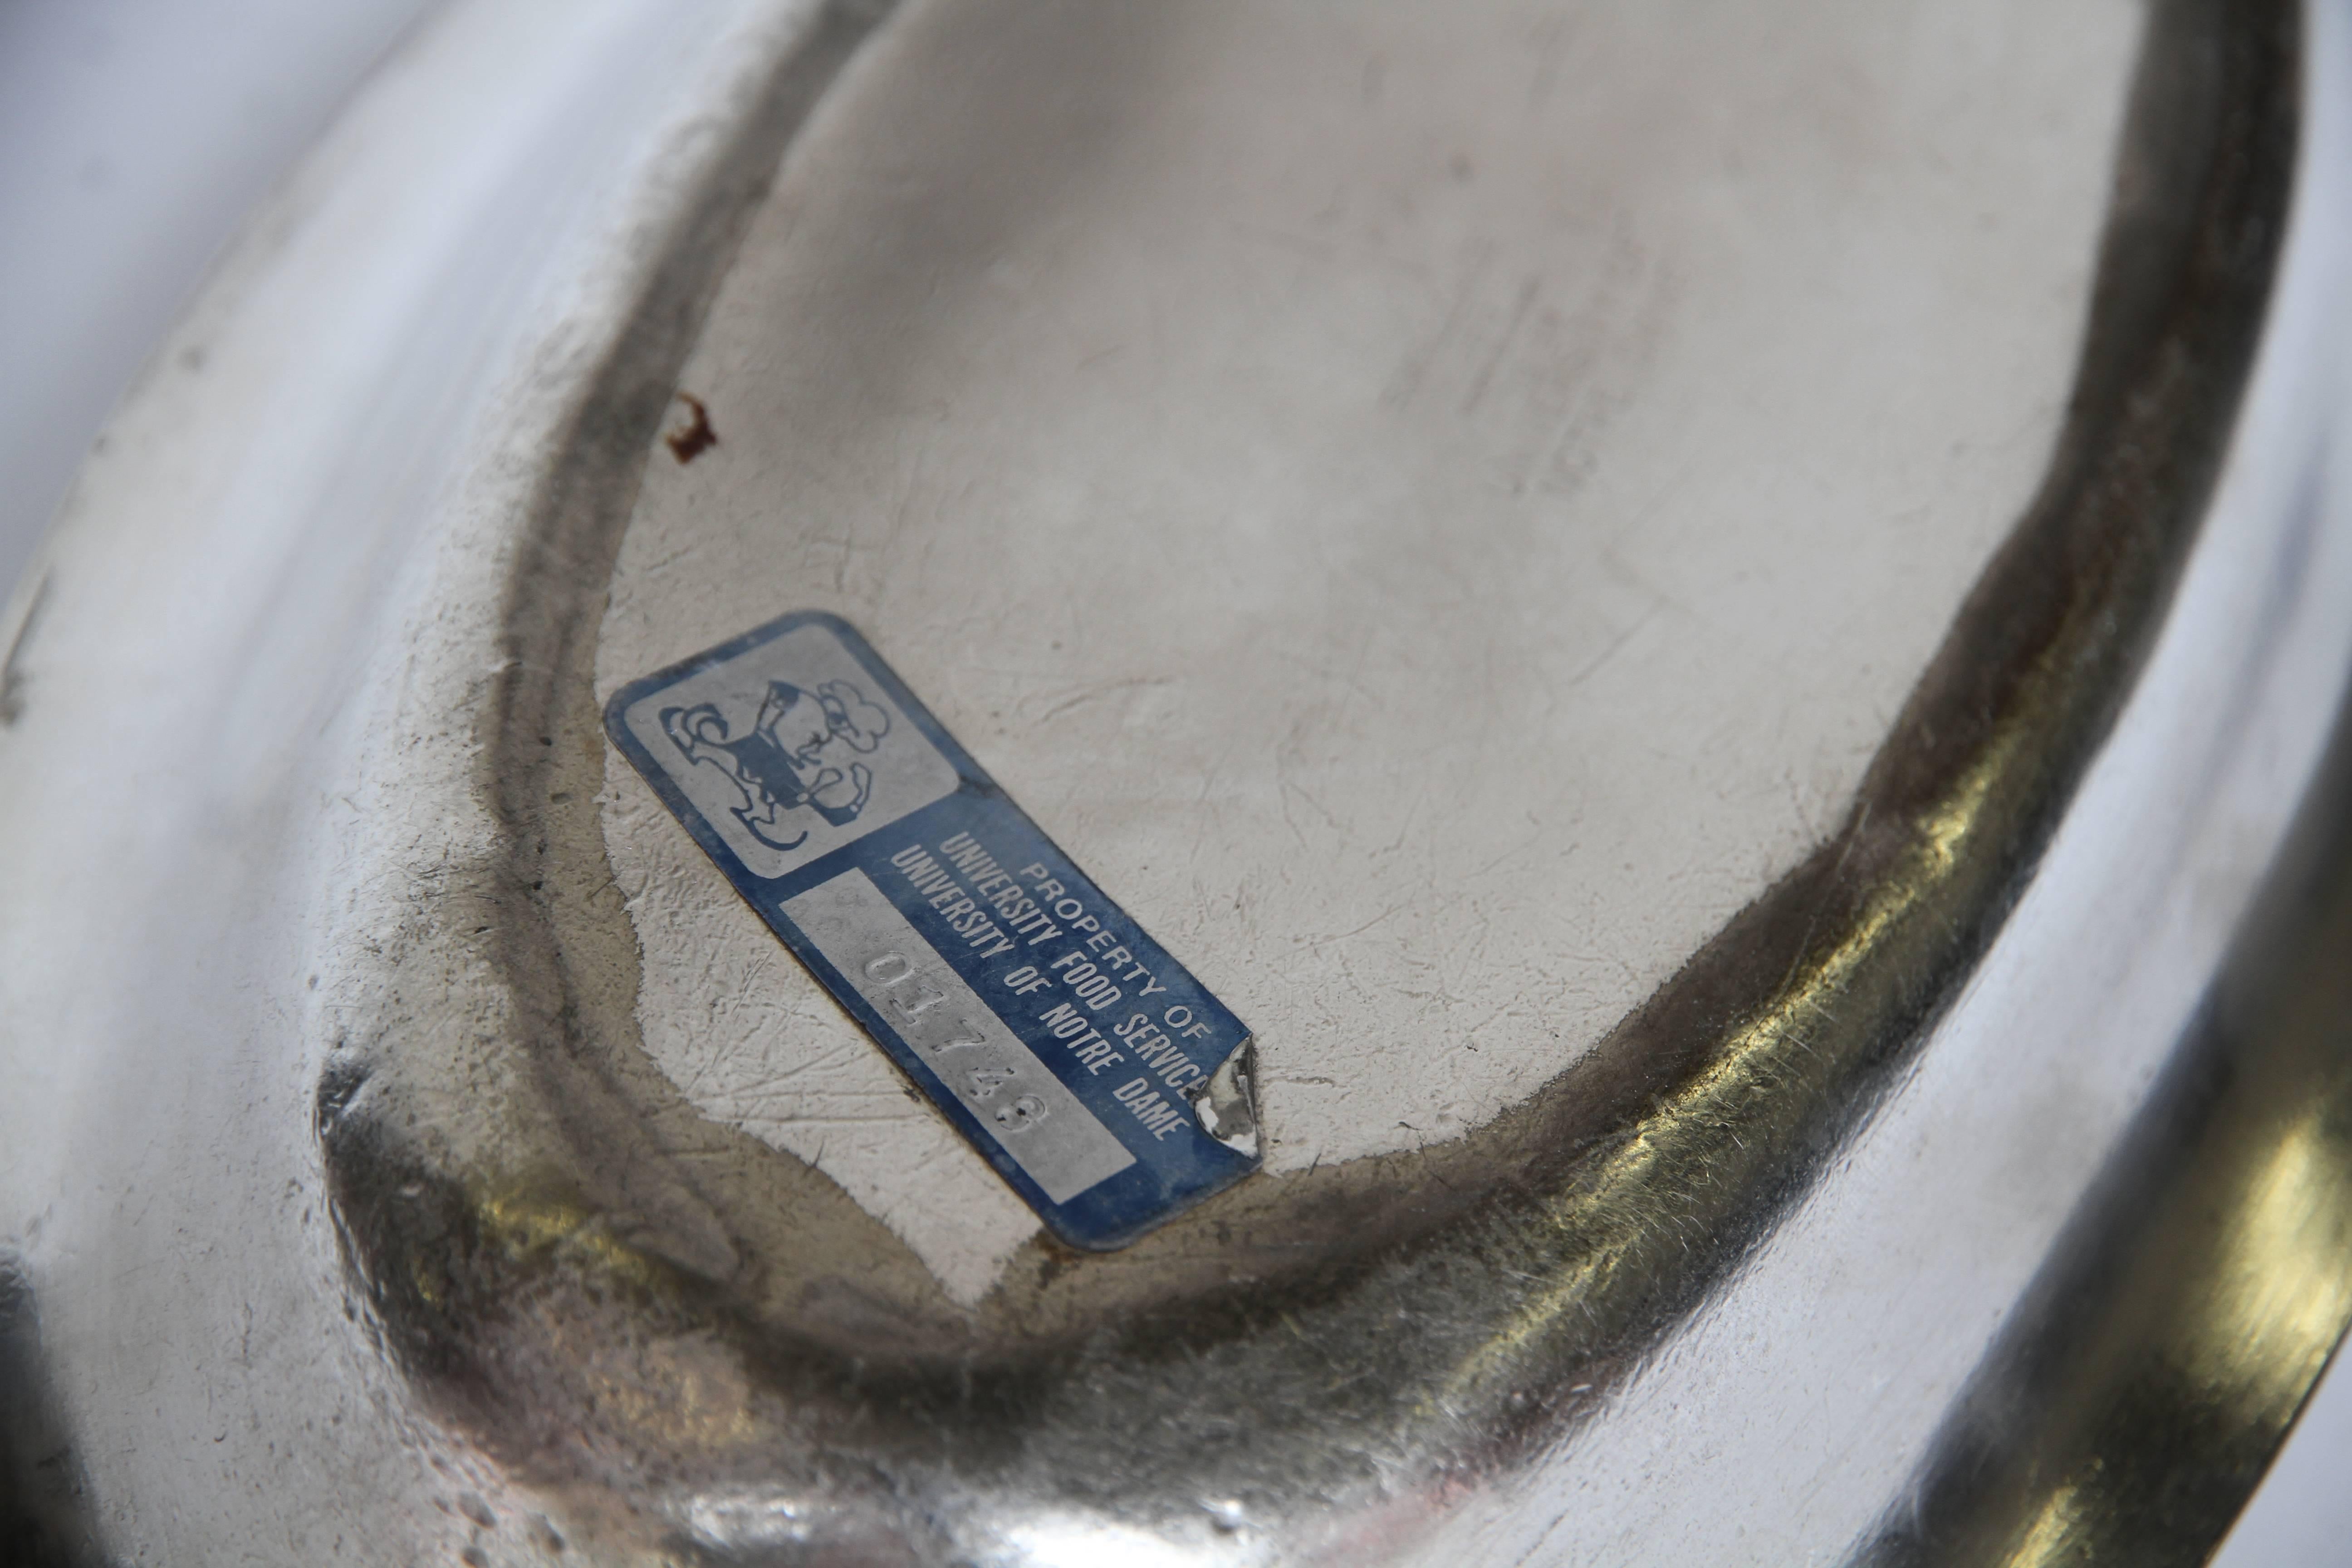 A silver soldered bowl made by R Wallace for the University of Notre Dame. With a classic shape these pieces were made extra dense and heavy so as not to spill when in use. Marked R WALLACE, 050, Sliver Soldered, 12 IN, University of Notre Dame. A